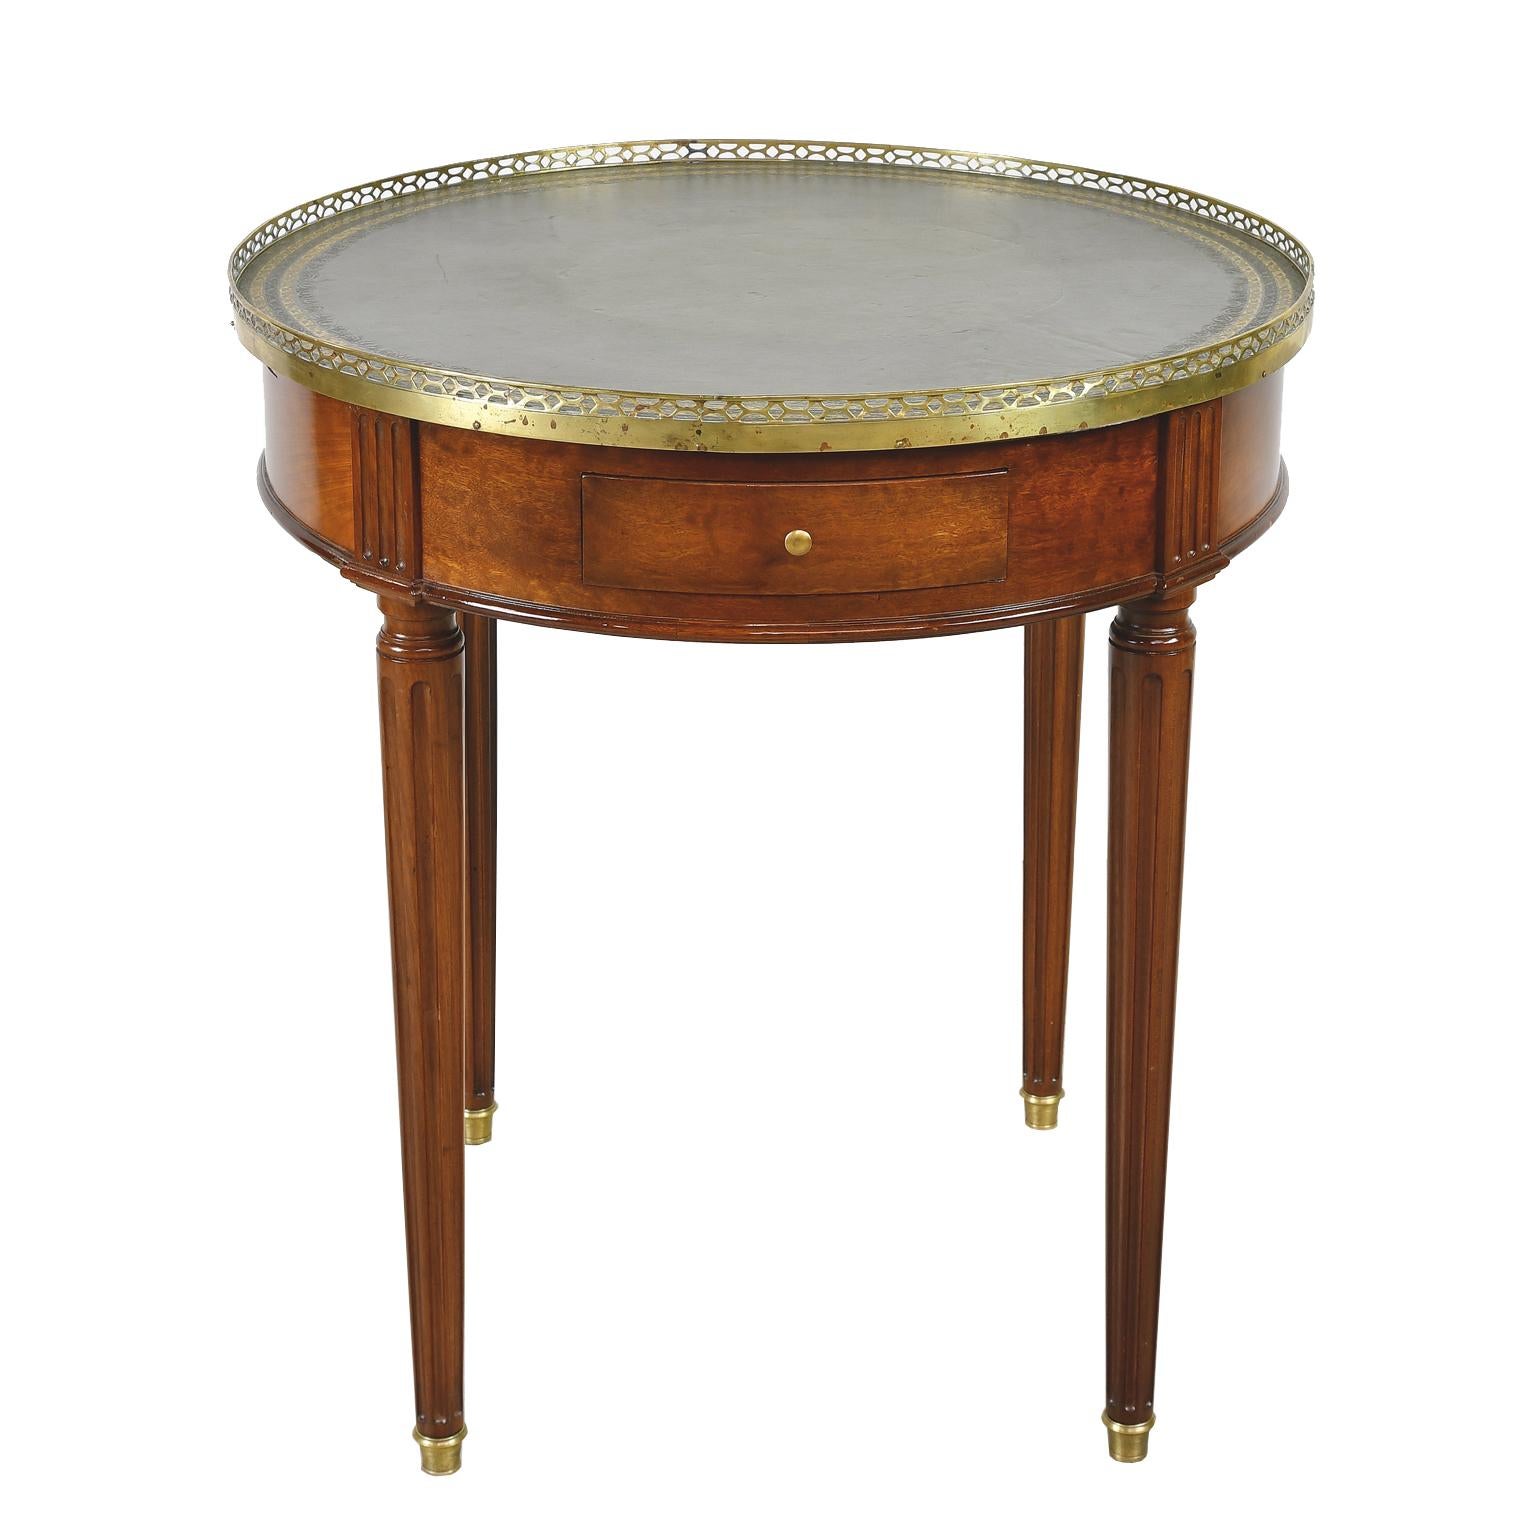 Embossed Round Bouillotte Table in Mahogany with Green Tooled Leather Top, France